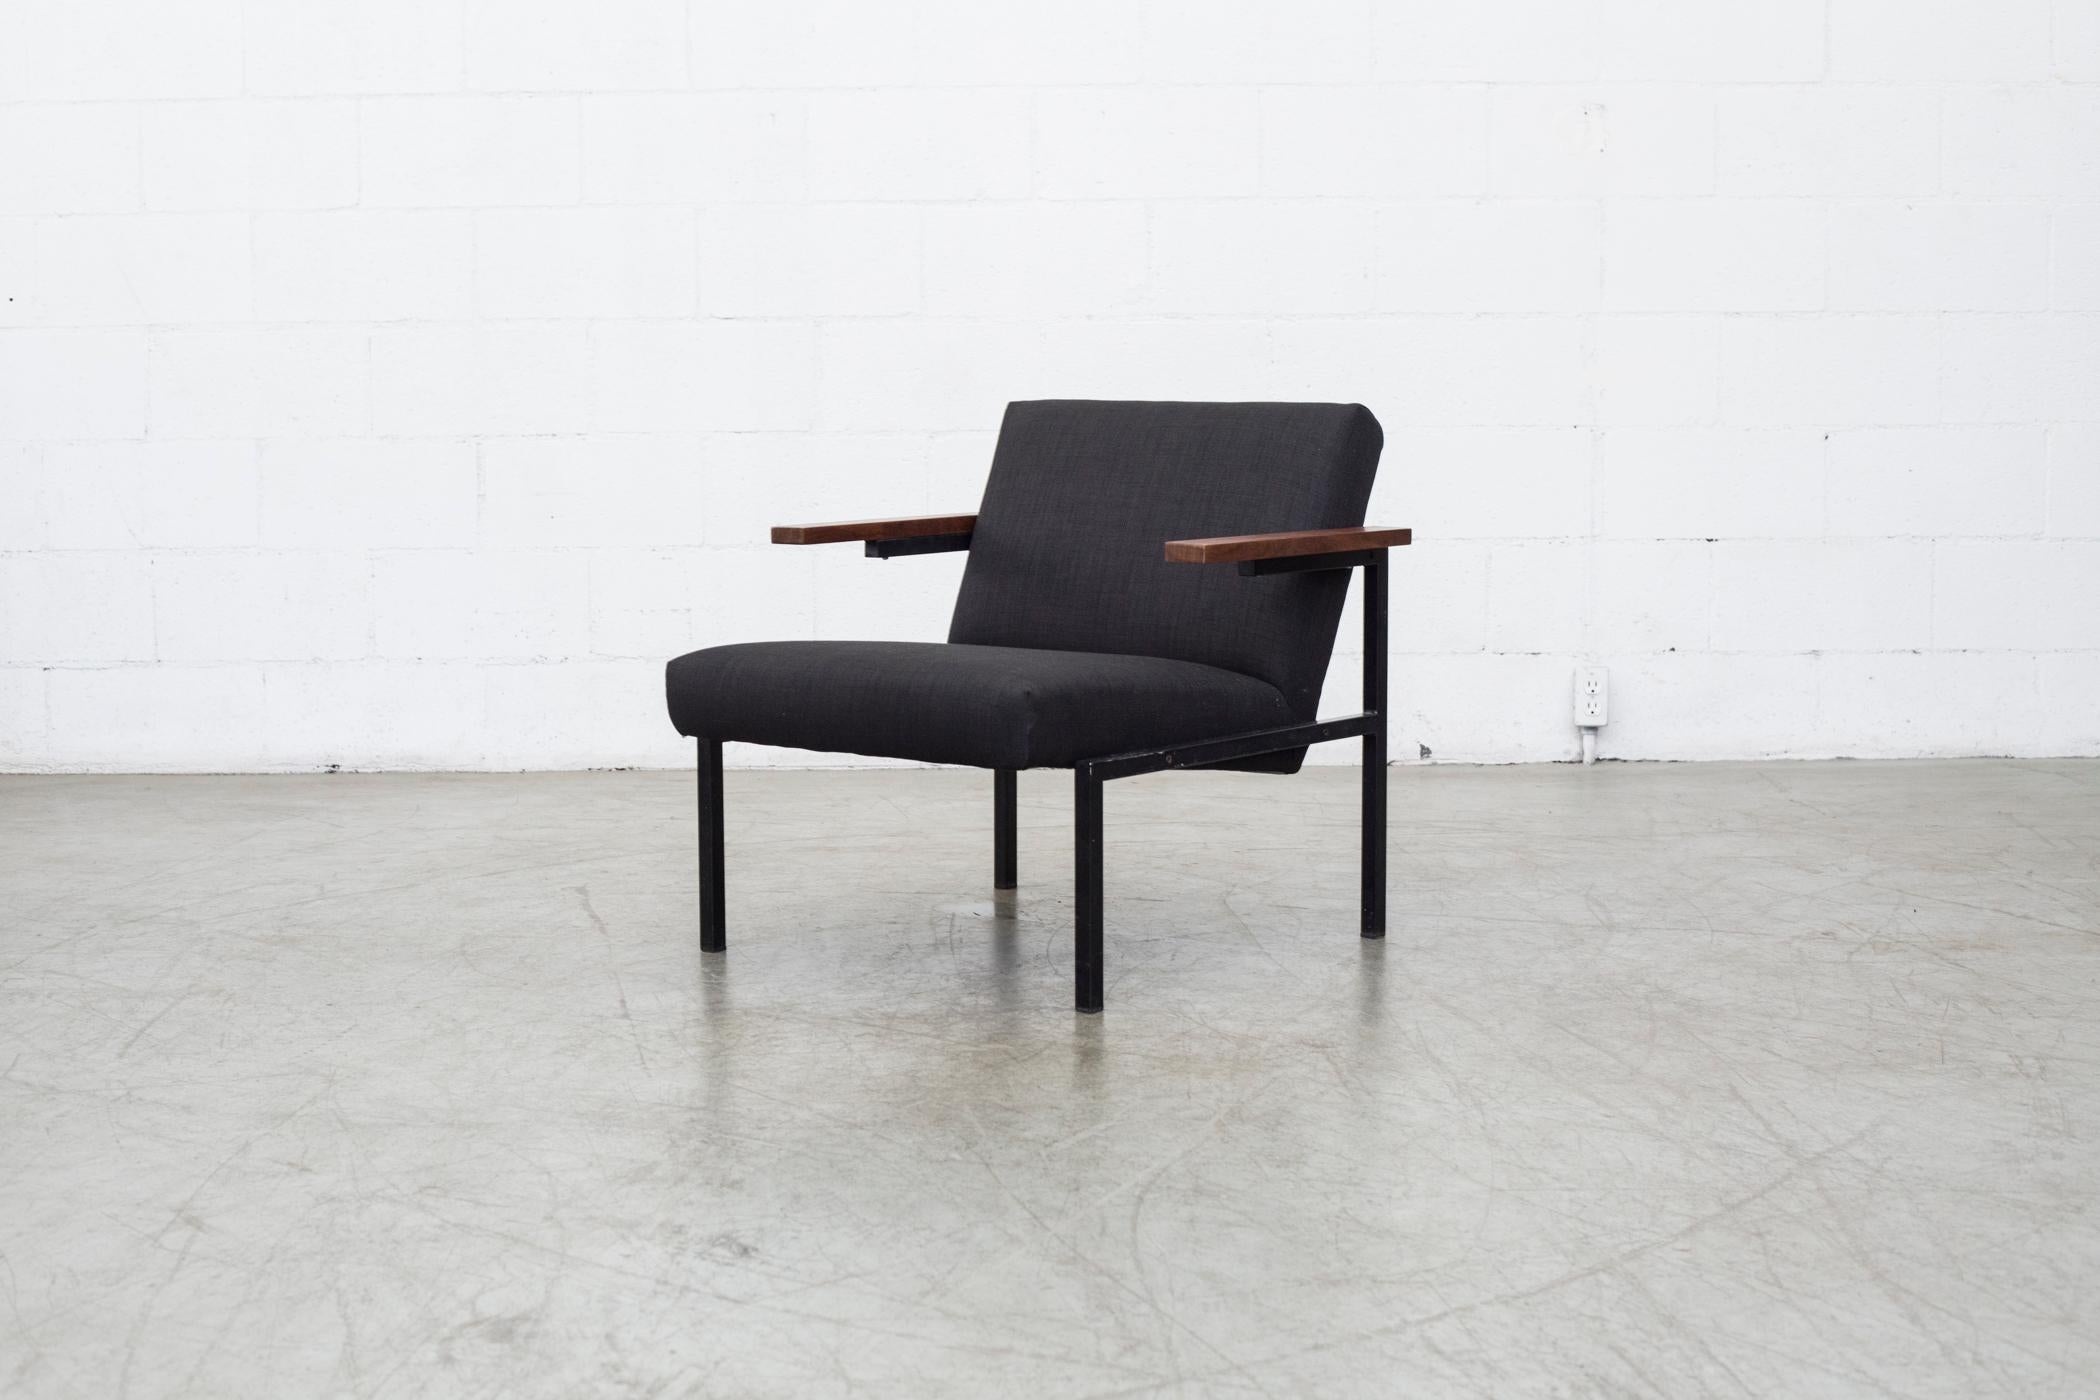 Martin Visser for Spectrum SZ 63 lounge chair with a black enameled metal frame, teak arm rests, and new almost black upholstery. Frame is in original condition. Martin Visser began working for Spectrum in 1954 as designer and head of collection. He